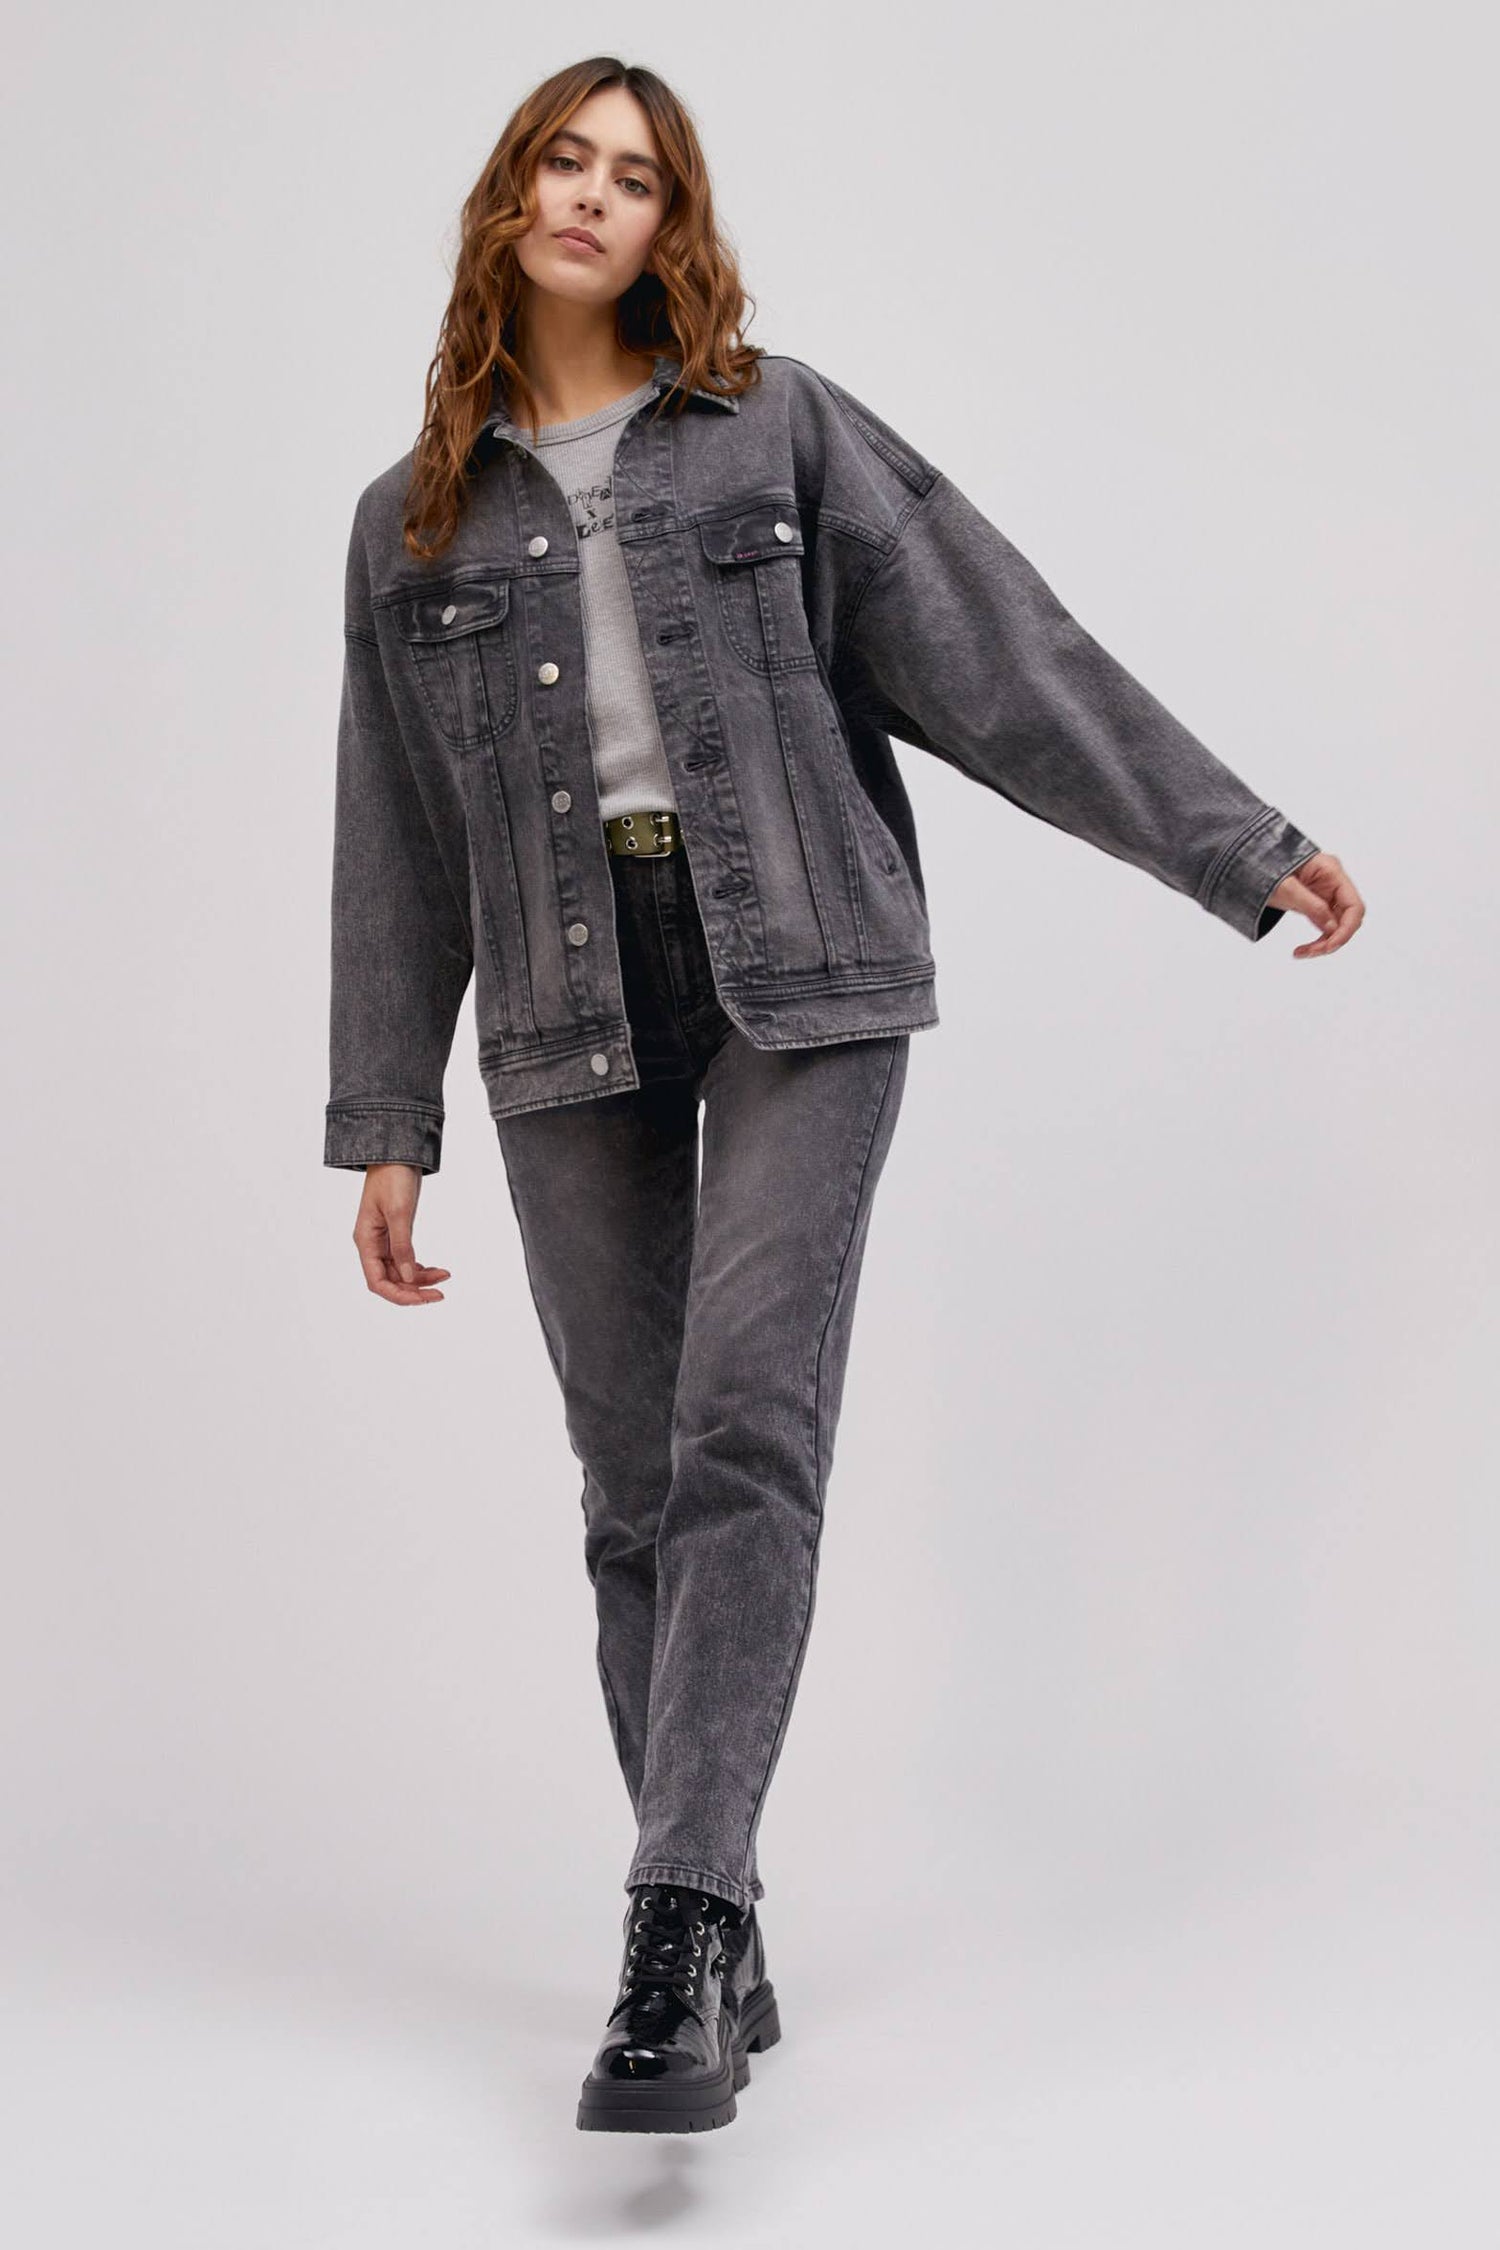 A curly-haired model featuring a sharp turn colored Loose Rider Jacket with a set of vertical pleats to the iconic zig-zag stitching and designed with an oversized look.